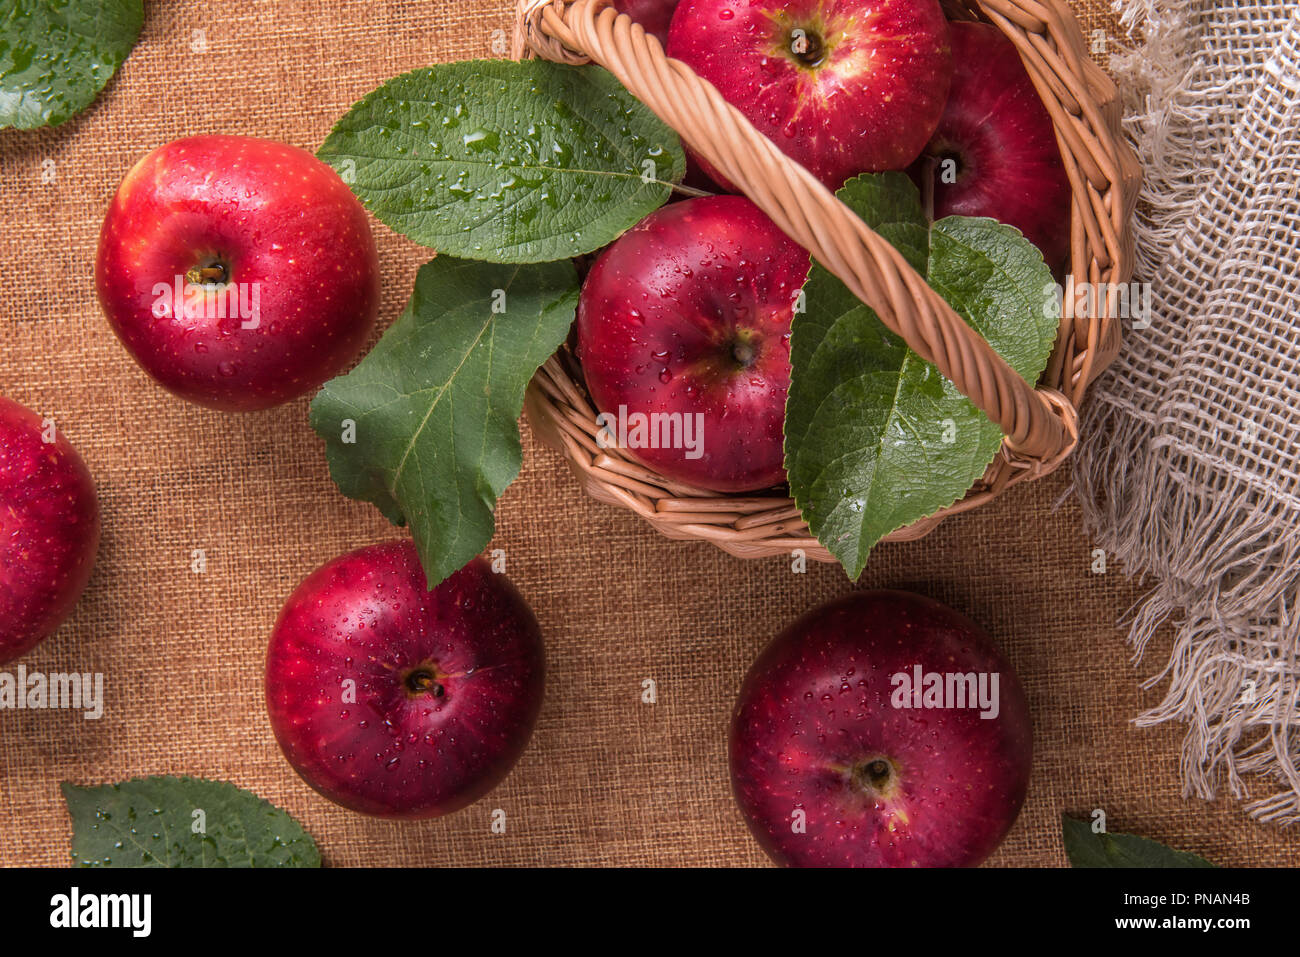 Close up of small basket full of fresh wet red apples and few apples and leaves around it on natural burlap. Selective focus. Healthy eating and autum Stock Photo